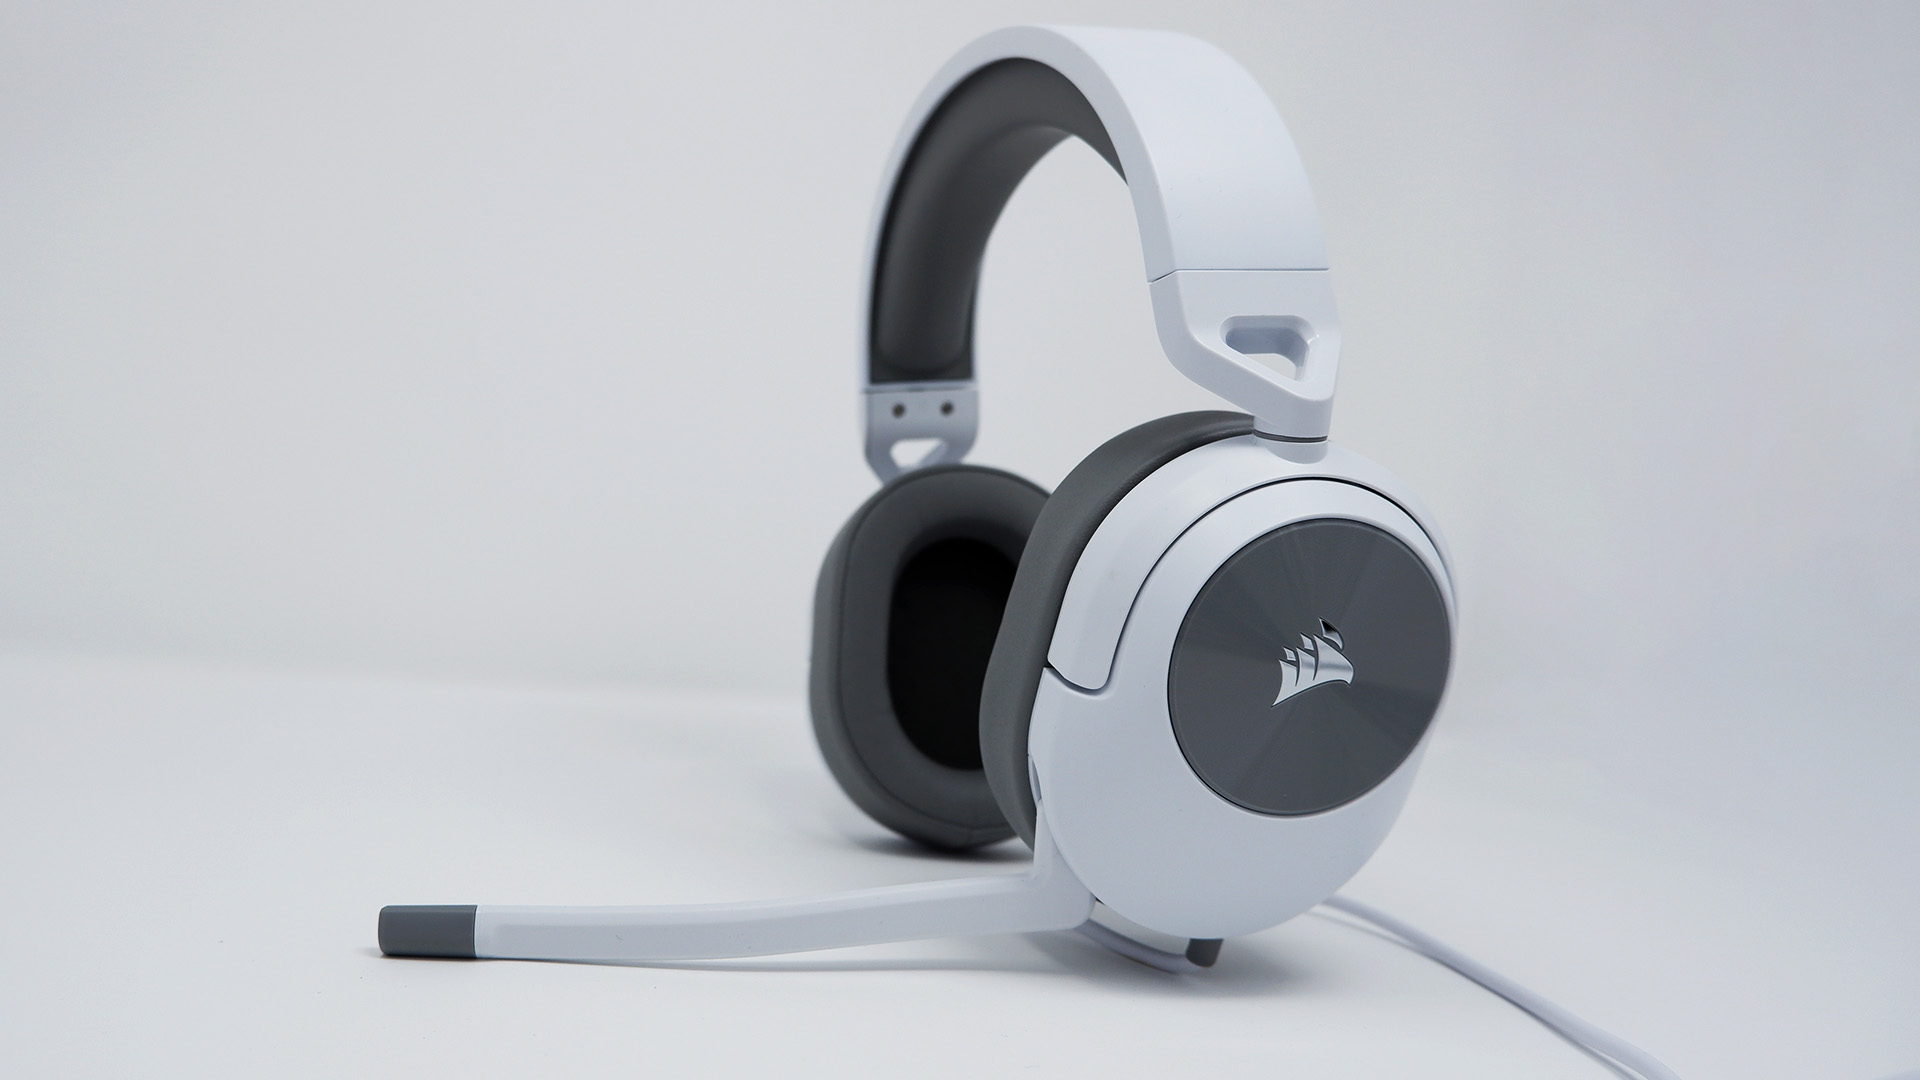 Corsair HS55 Stereo gaming headphones shot on a white background